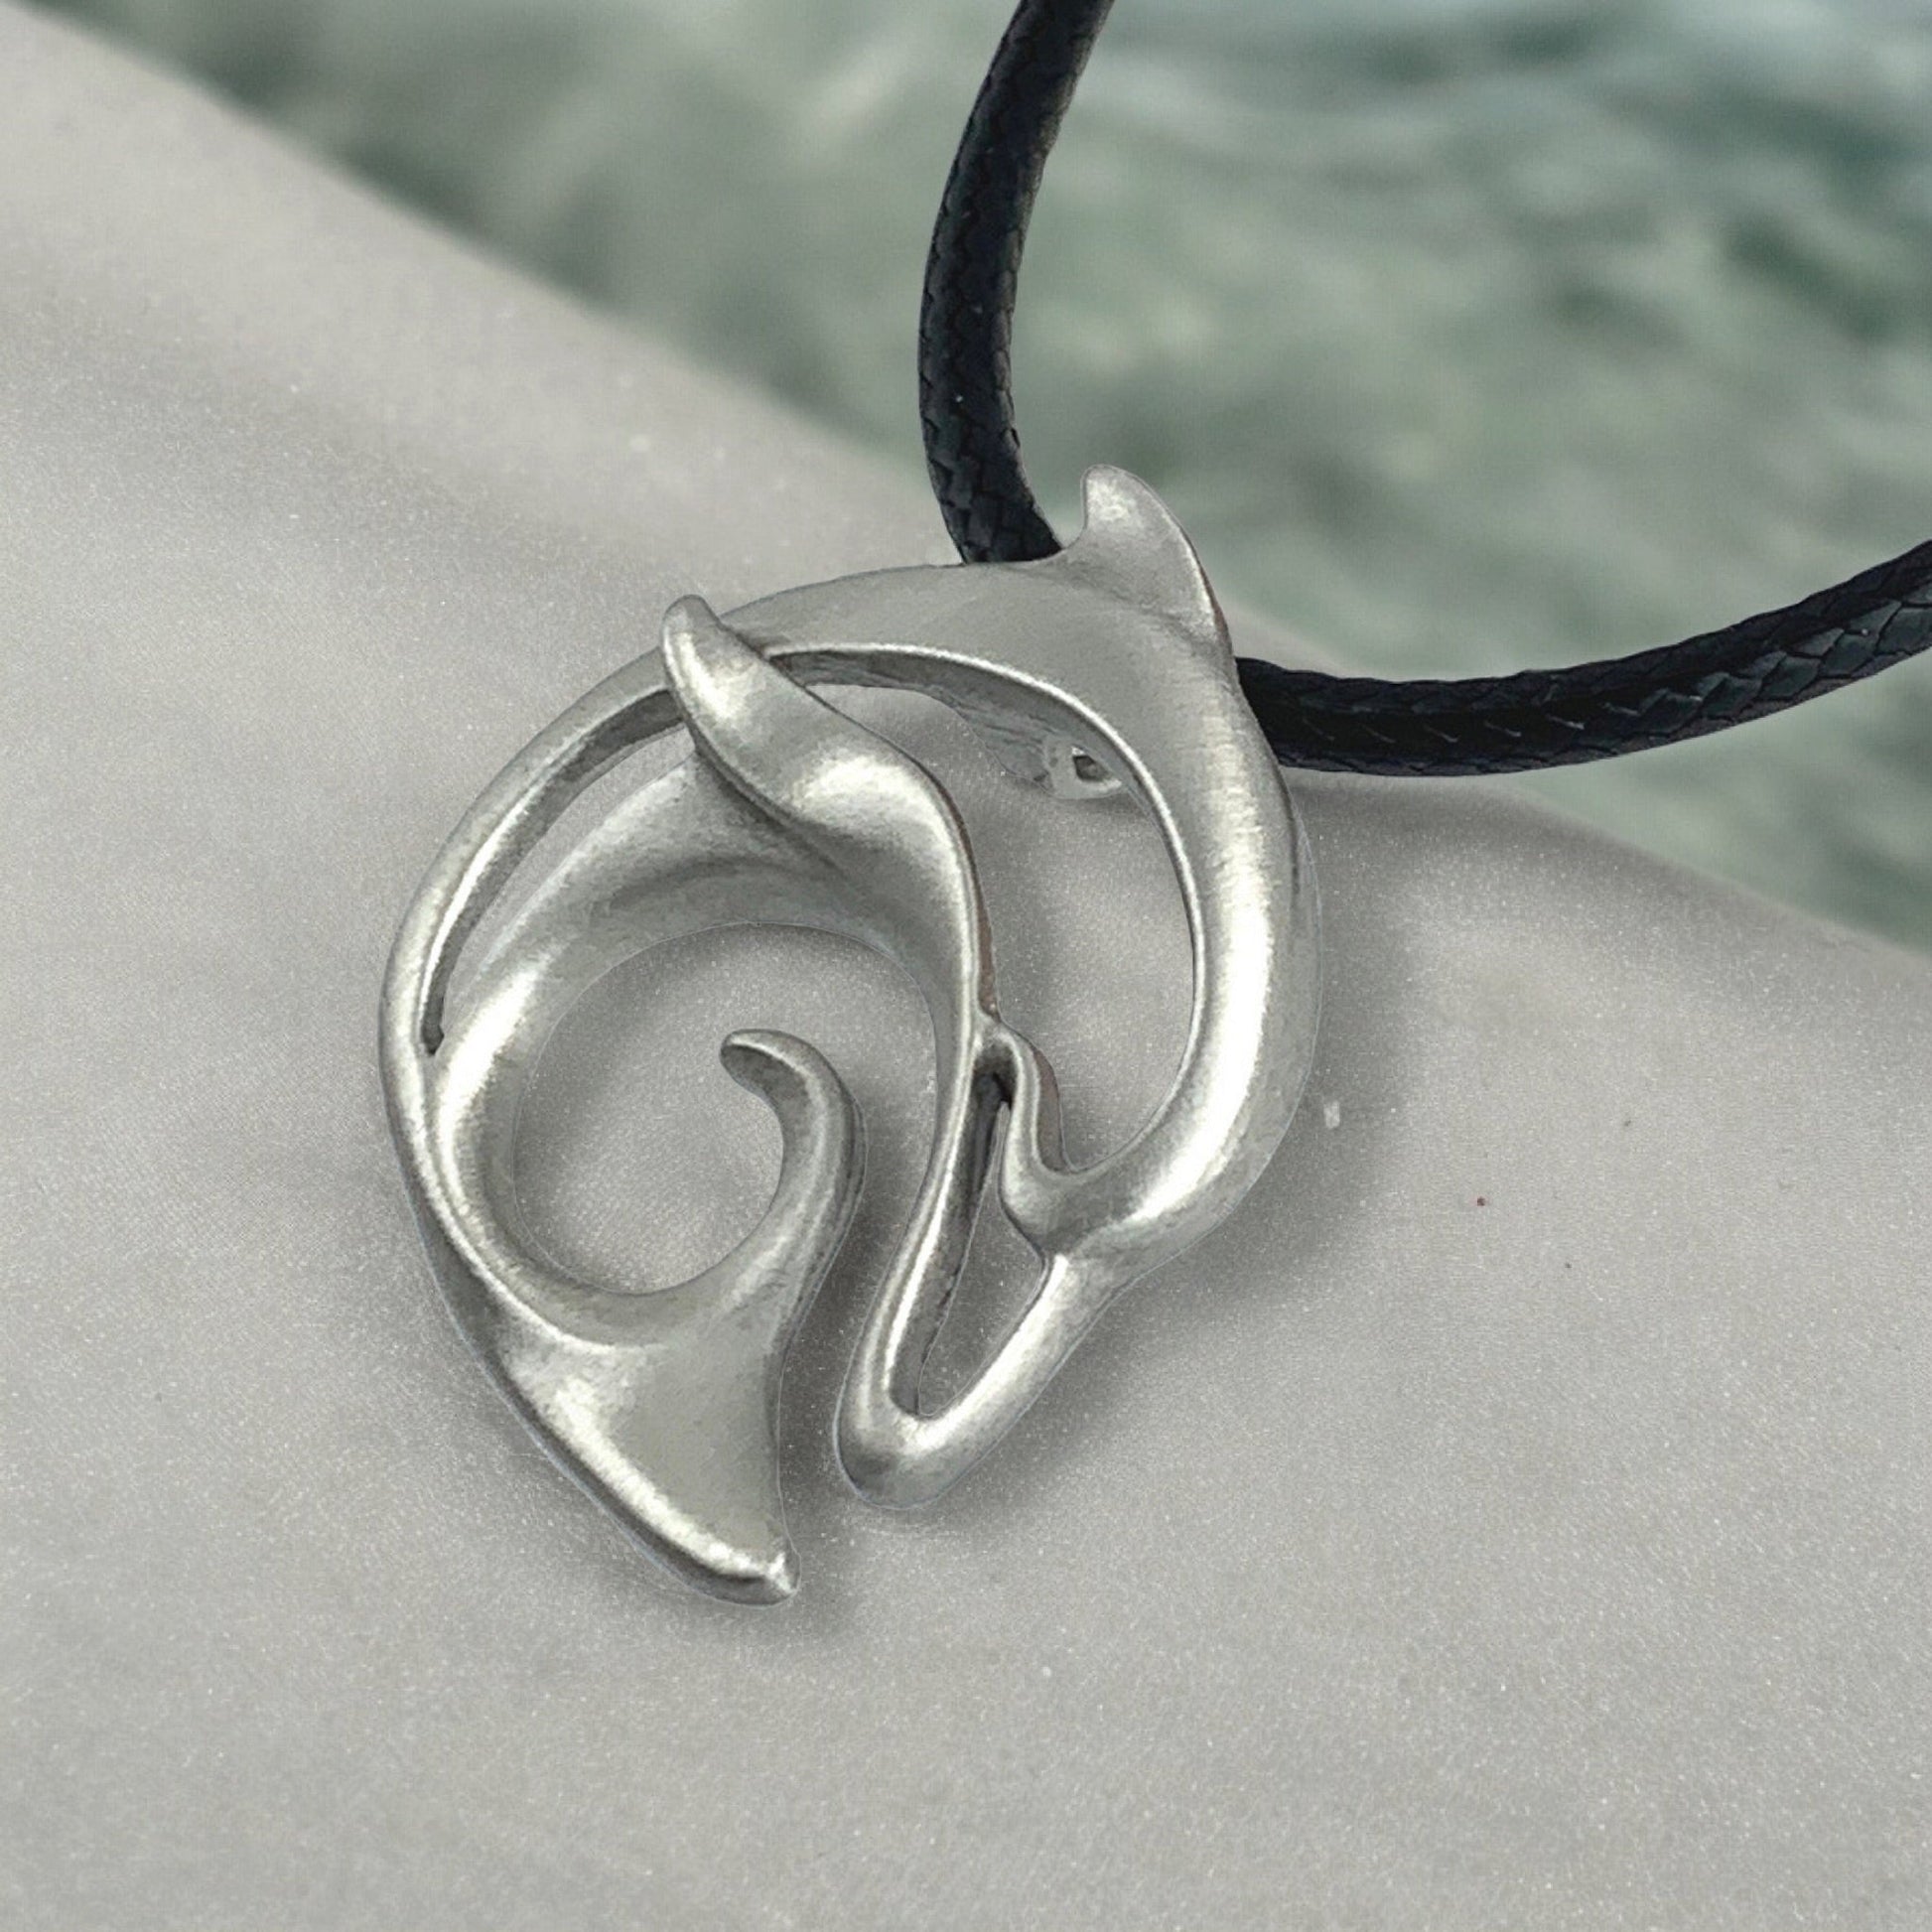 Dolphin Necklace Pewter Pendant- Dolphin Gift for Women and Men, Dolphin Necklaces, Gifts for Dolphin Lovers, Sea Life Jewelry, Dolphin Charm - The Tool Store